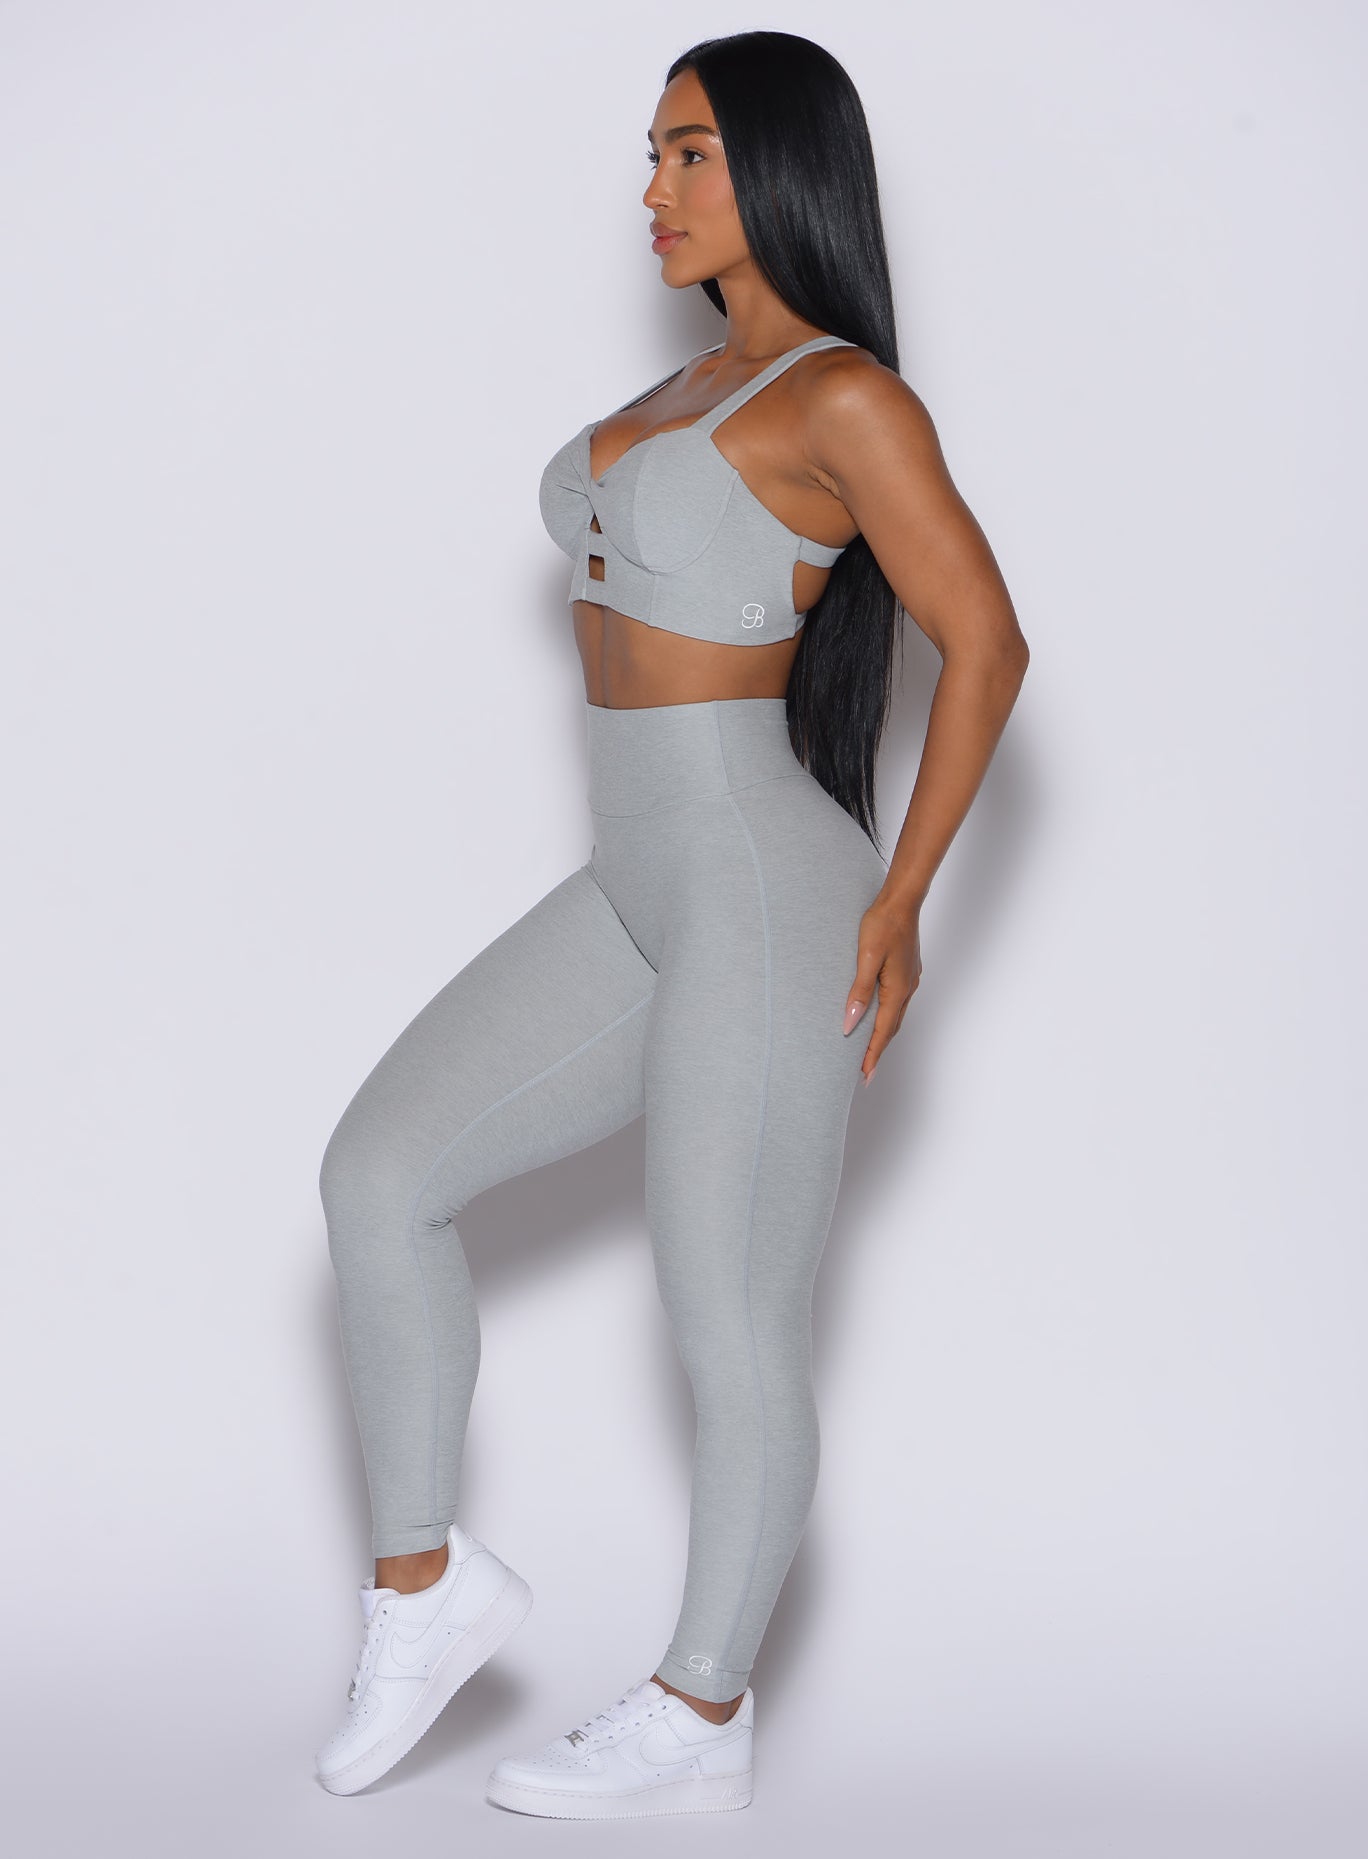 Left side view of model facing forward wearing the Movement Leggings in Light Cloud color and a matching Sports Bra